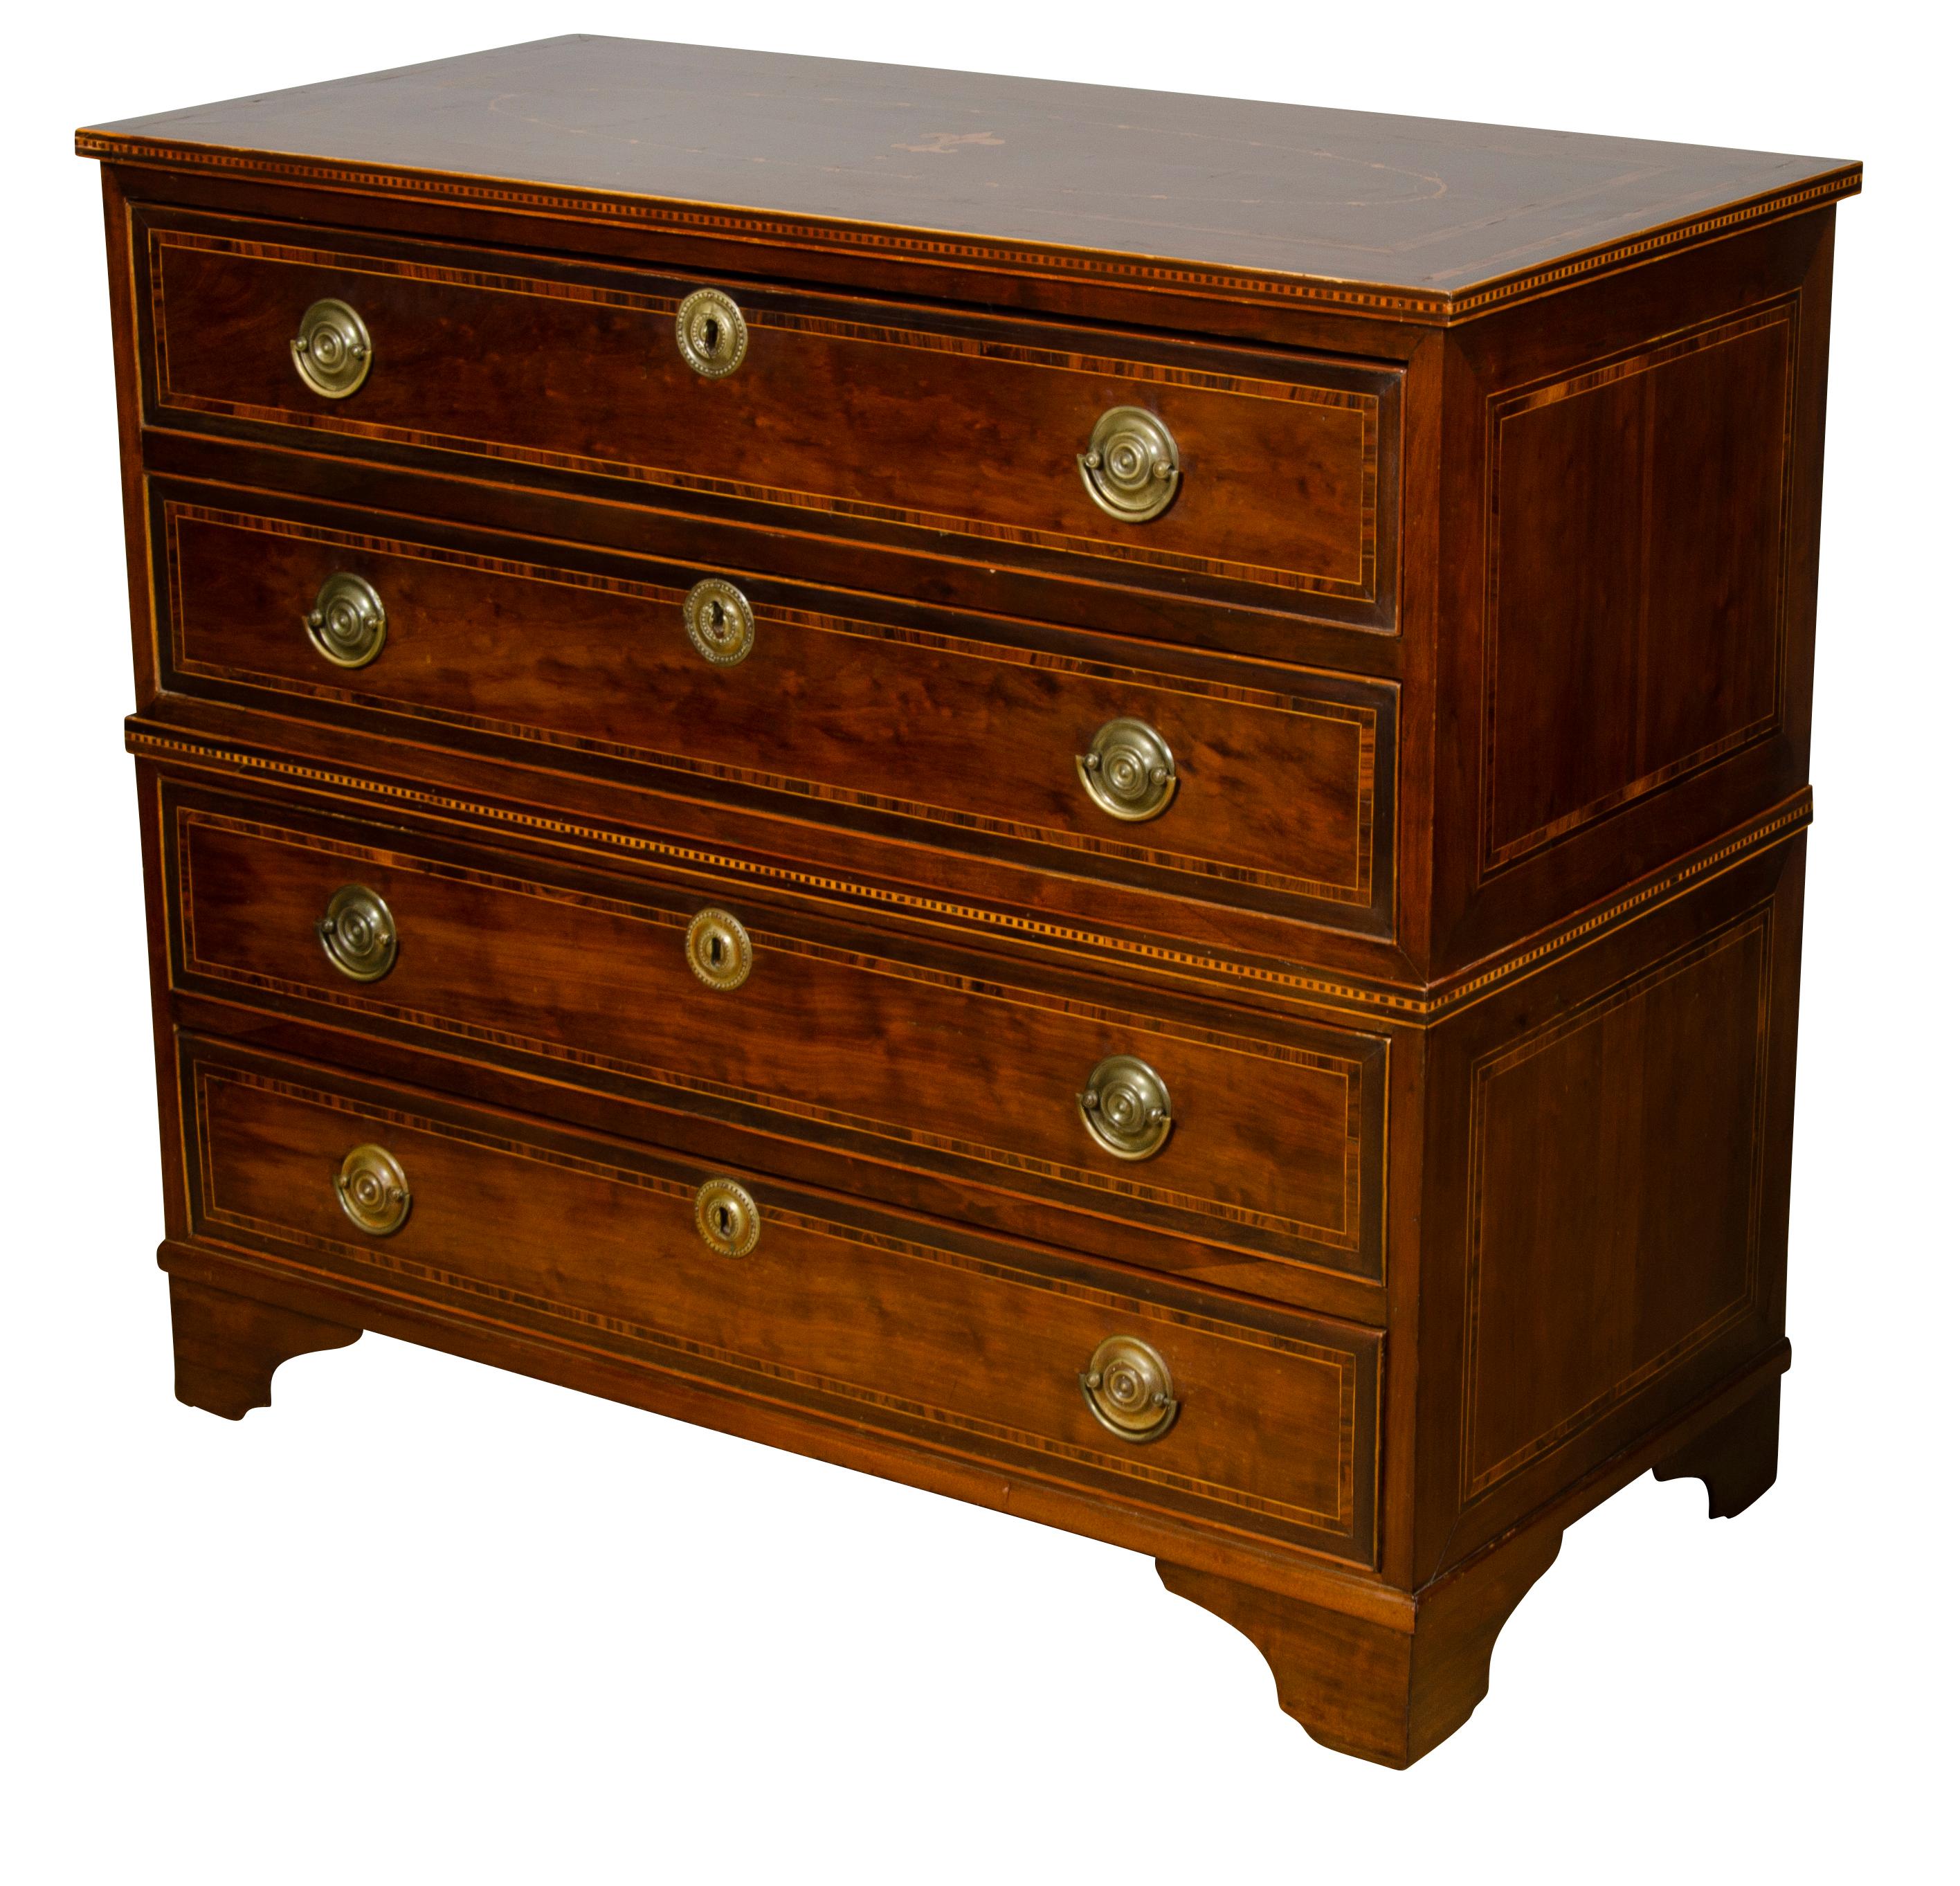 Made to come apart like a campaign chest with rectangular top with inlaid decoration over four drawers each with cross banded edge and brass handles, bracket feet.